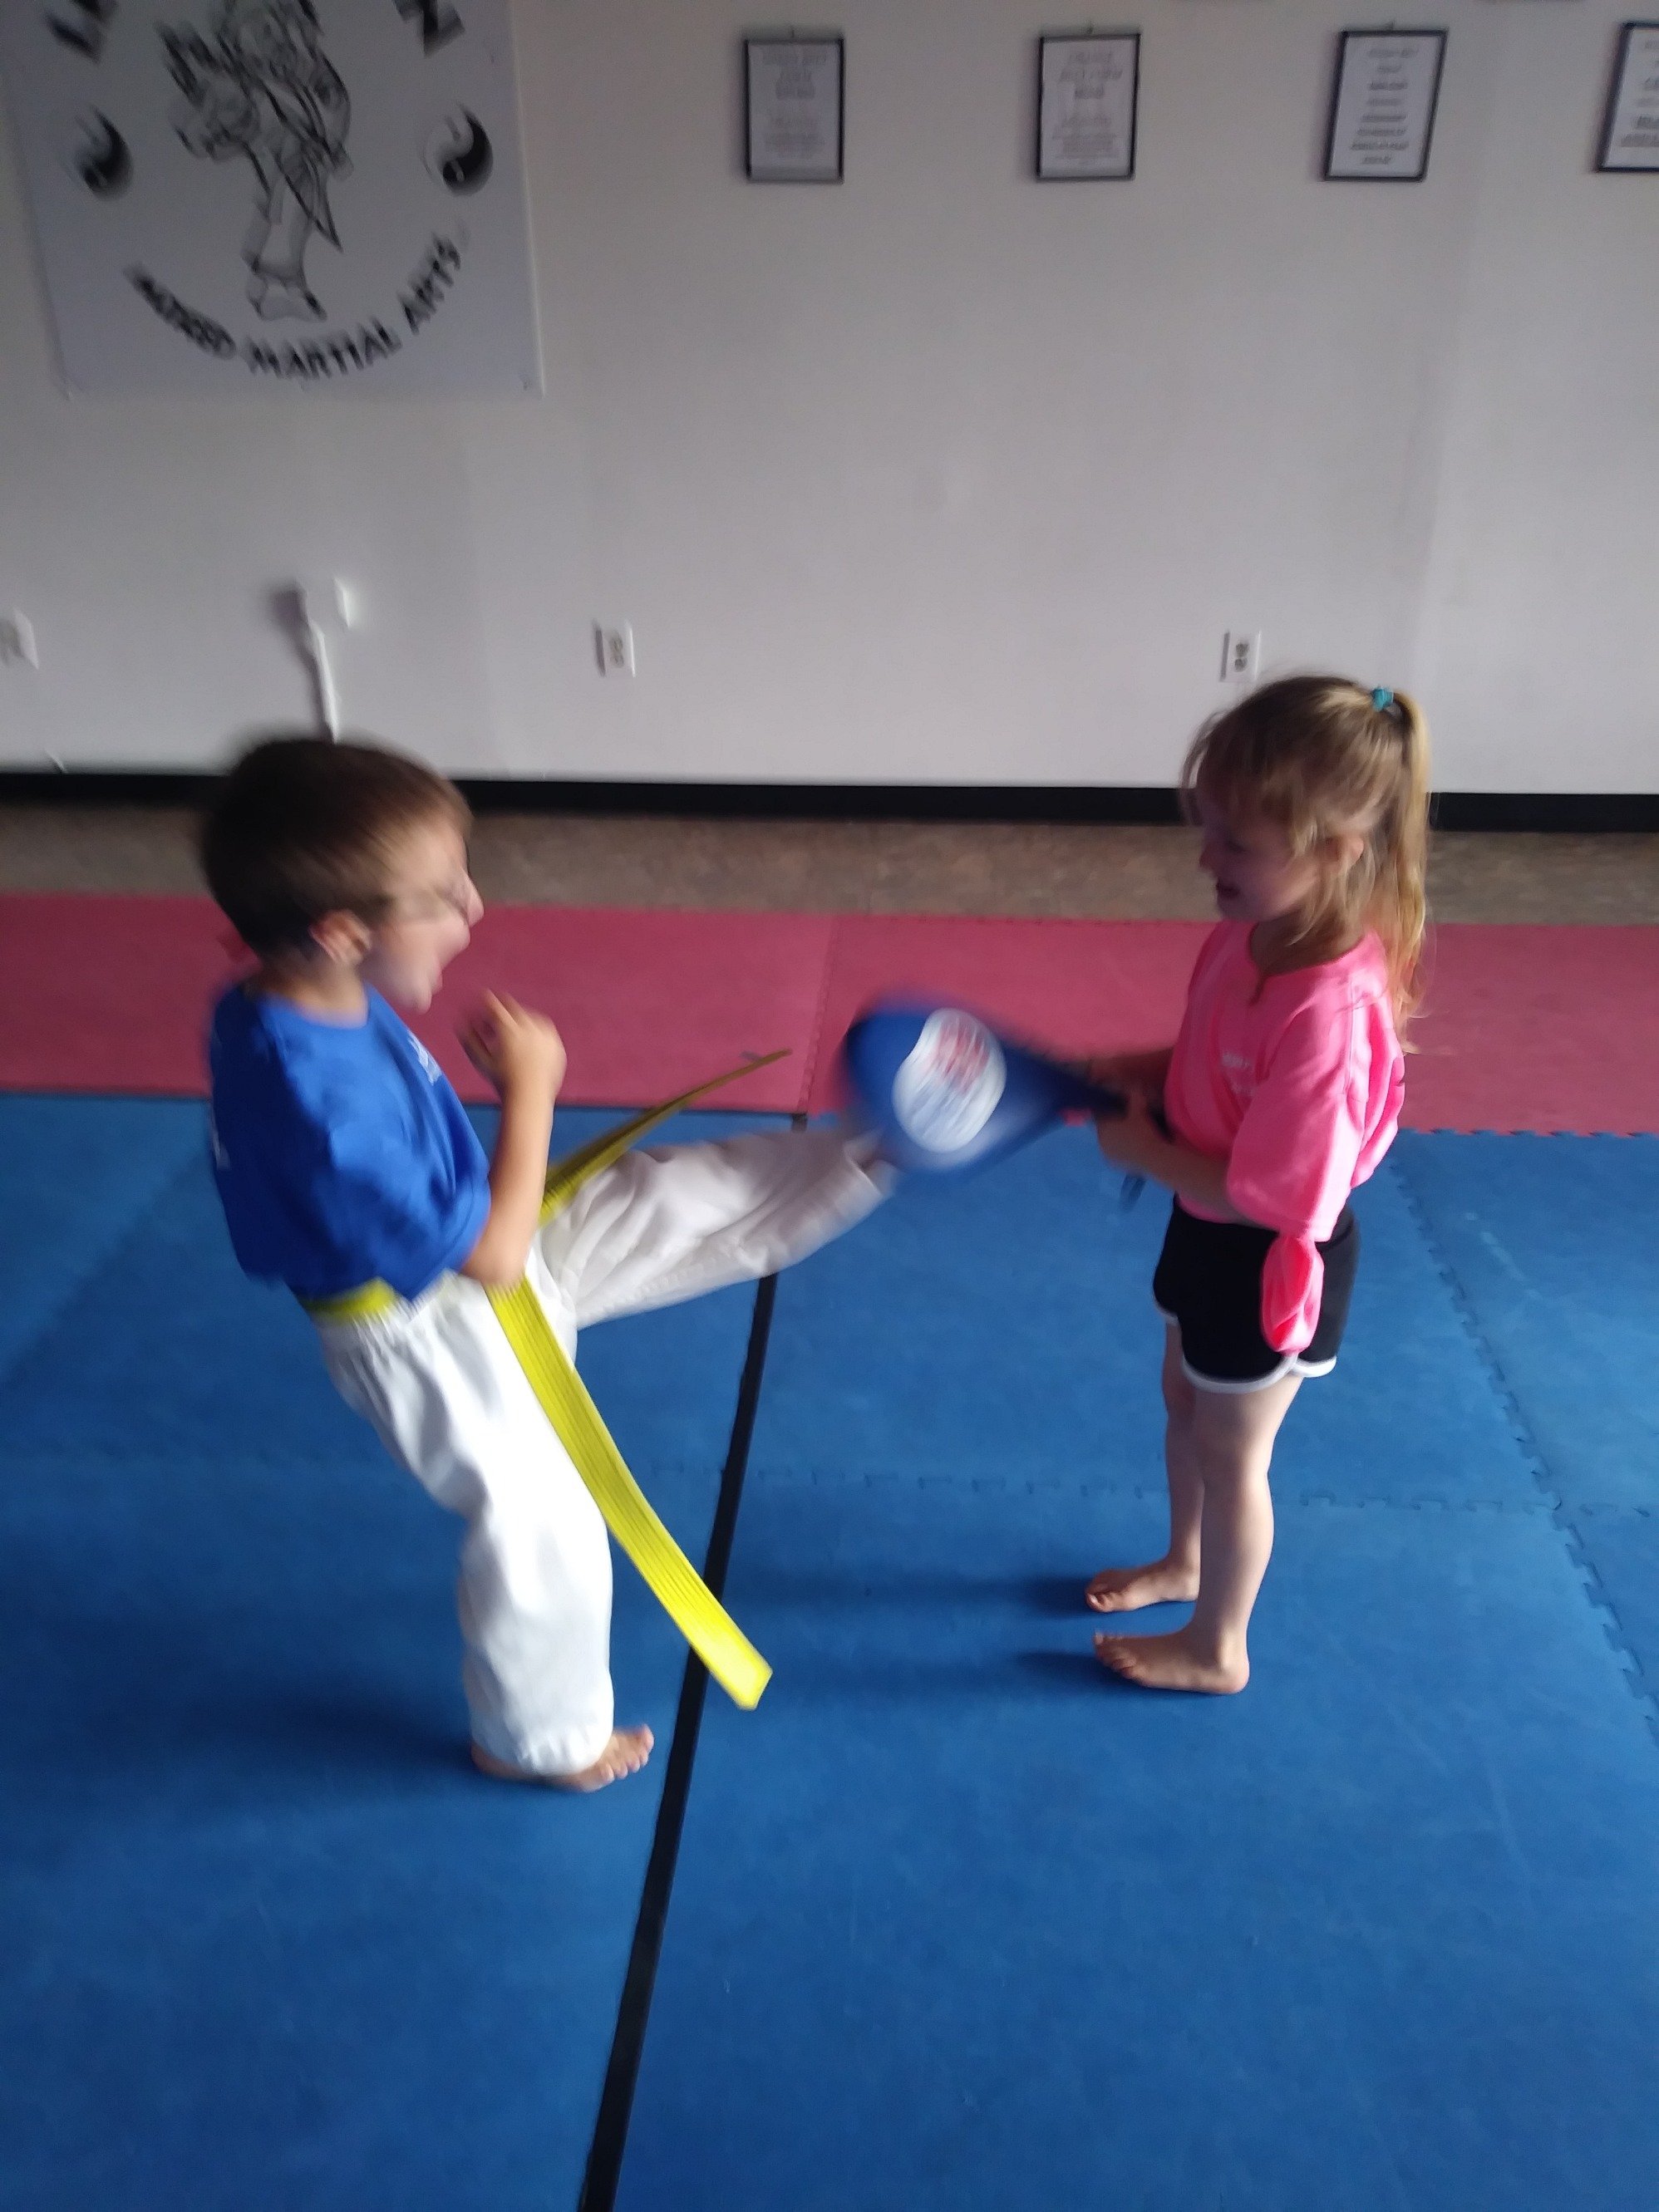 We are a mixed martial school in Levittown, PA. We have classes starting at age 2 all the up to adult. Call us today to get started at 267-901-4071.